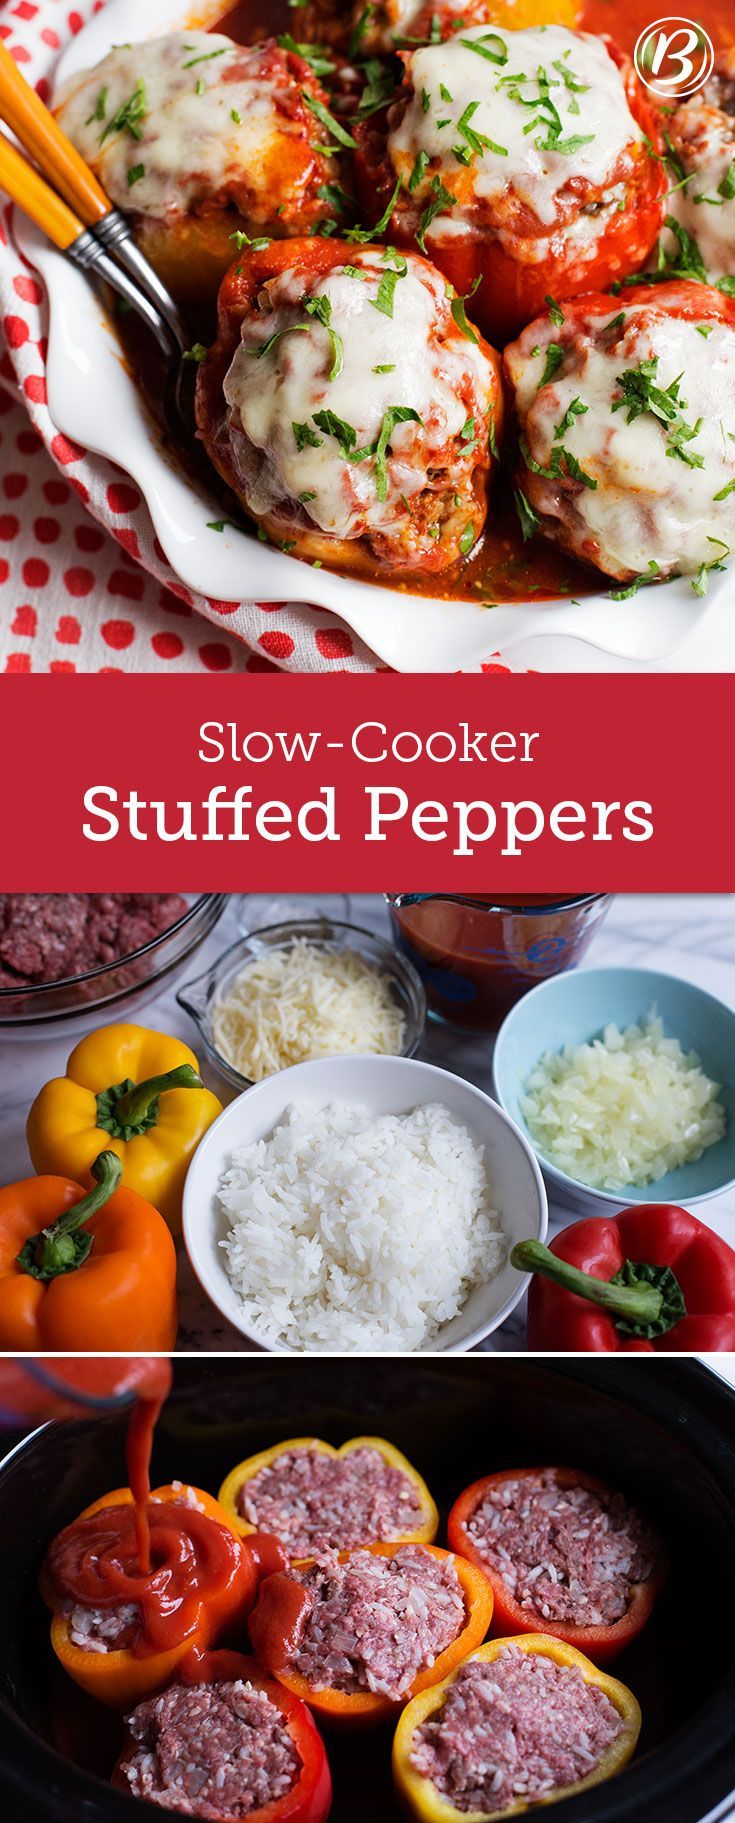 Classic beef- and rice-stuffed peppers are now easier to make than ever with some help from your slow cooker. Use any good melting